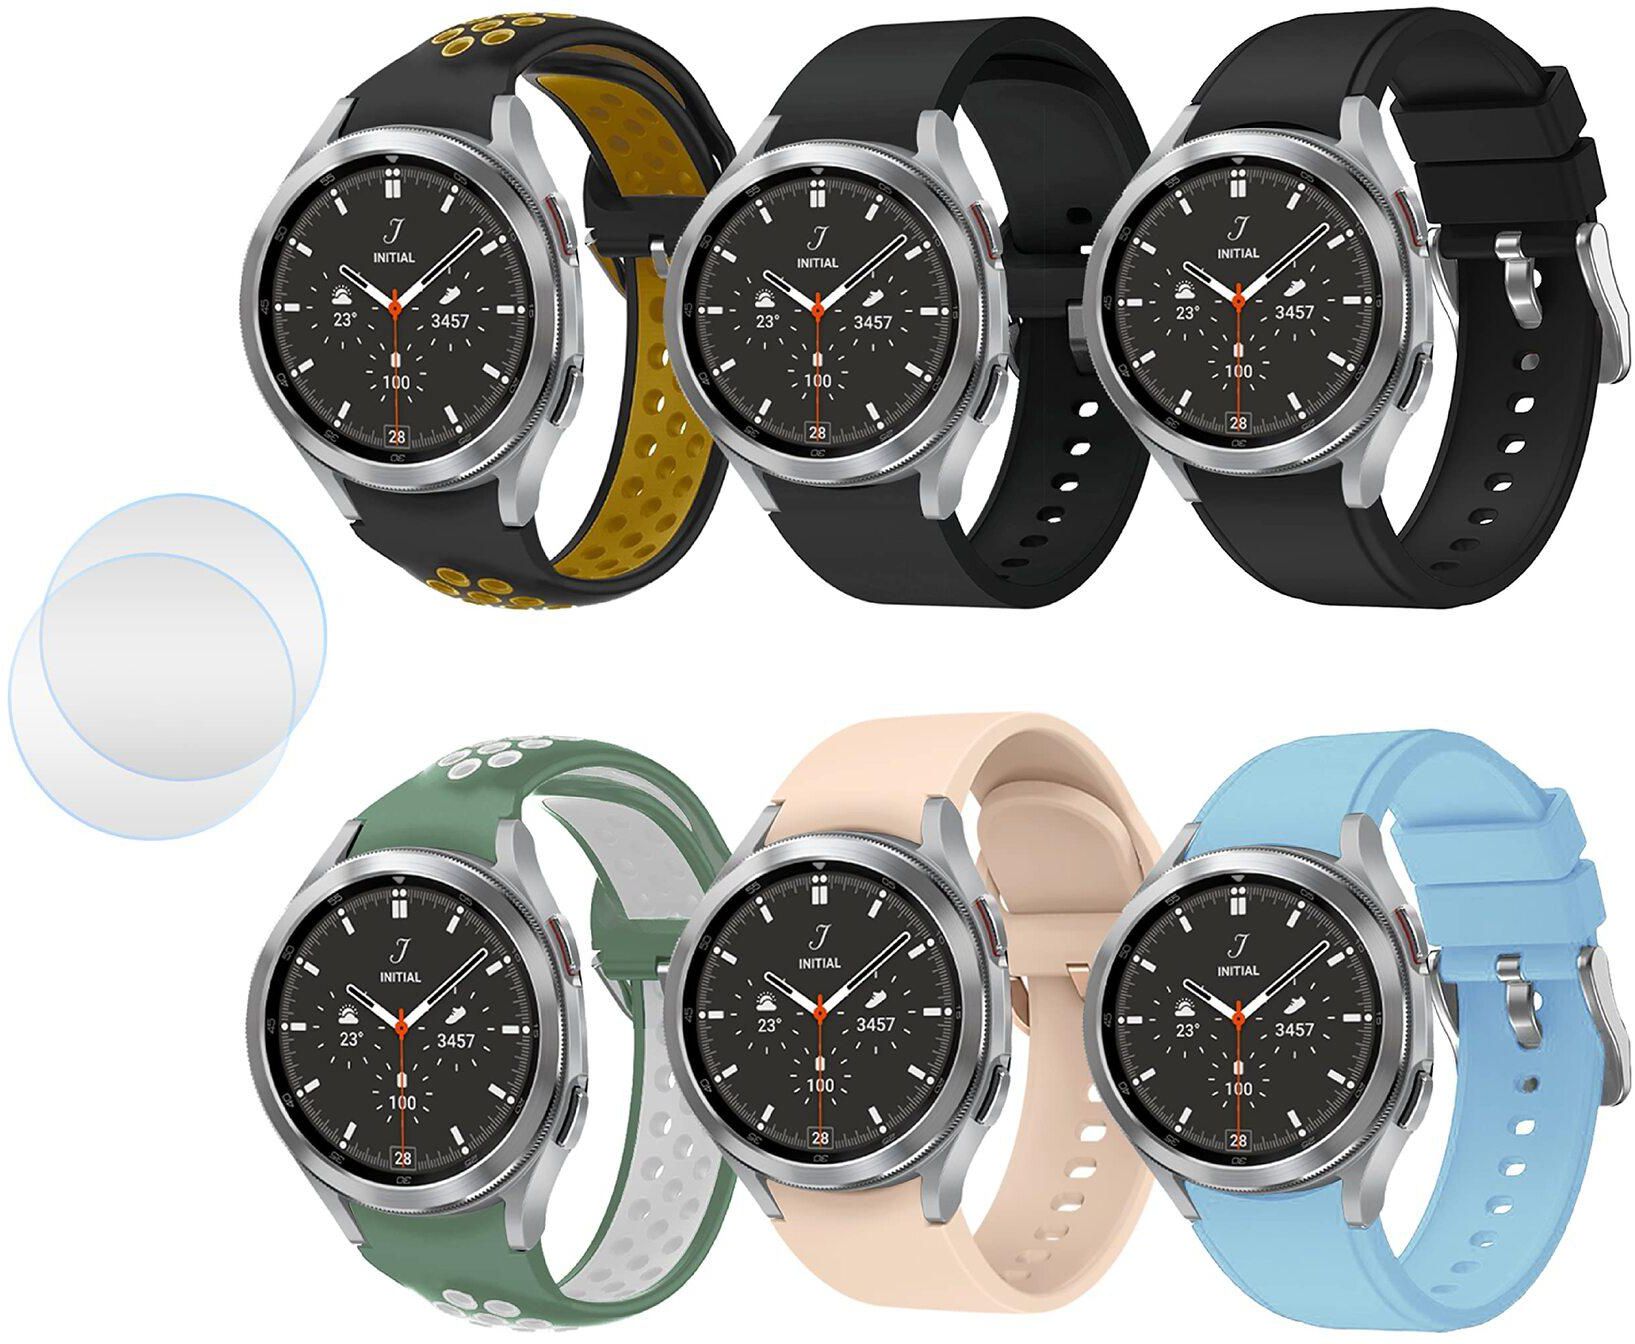 Moxedo Optimum Bundle Pack of 8, Multi-Color Silicone Replacement Strap Band with 42mm Screen Protector Compatible For Samsung Galaxy Watch 4 Classic (C2)